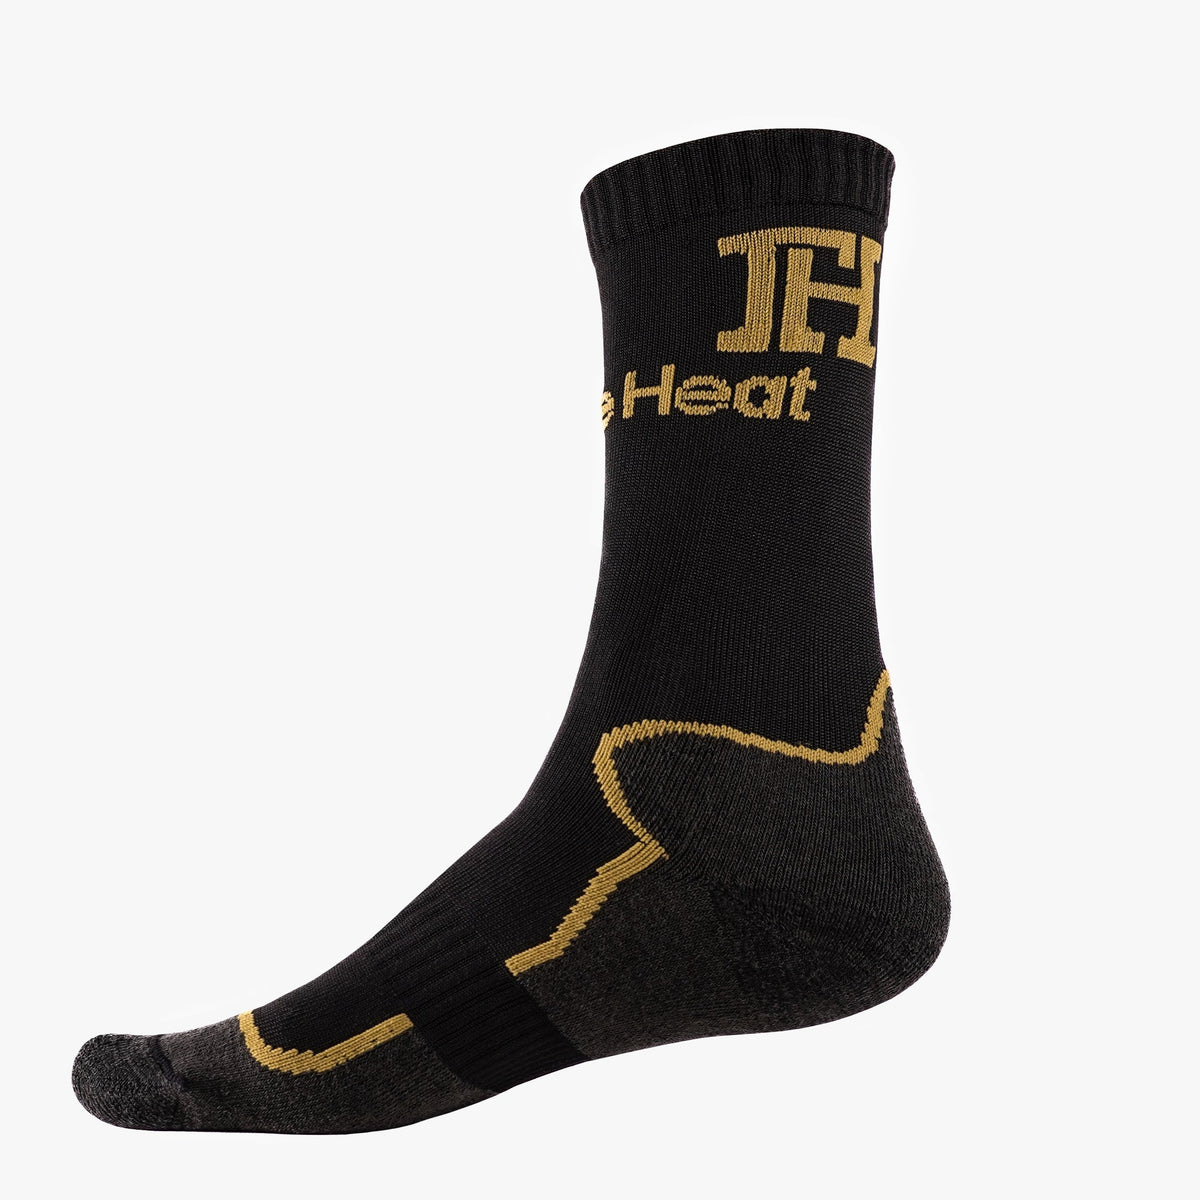 Heavy Winter Socks With All Day Comfort